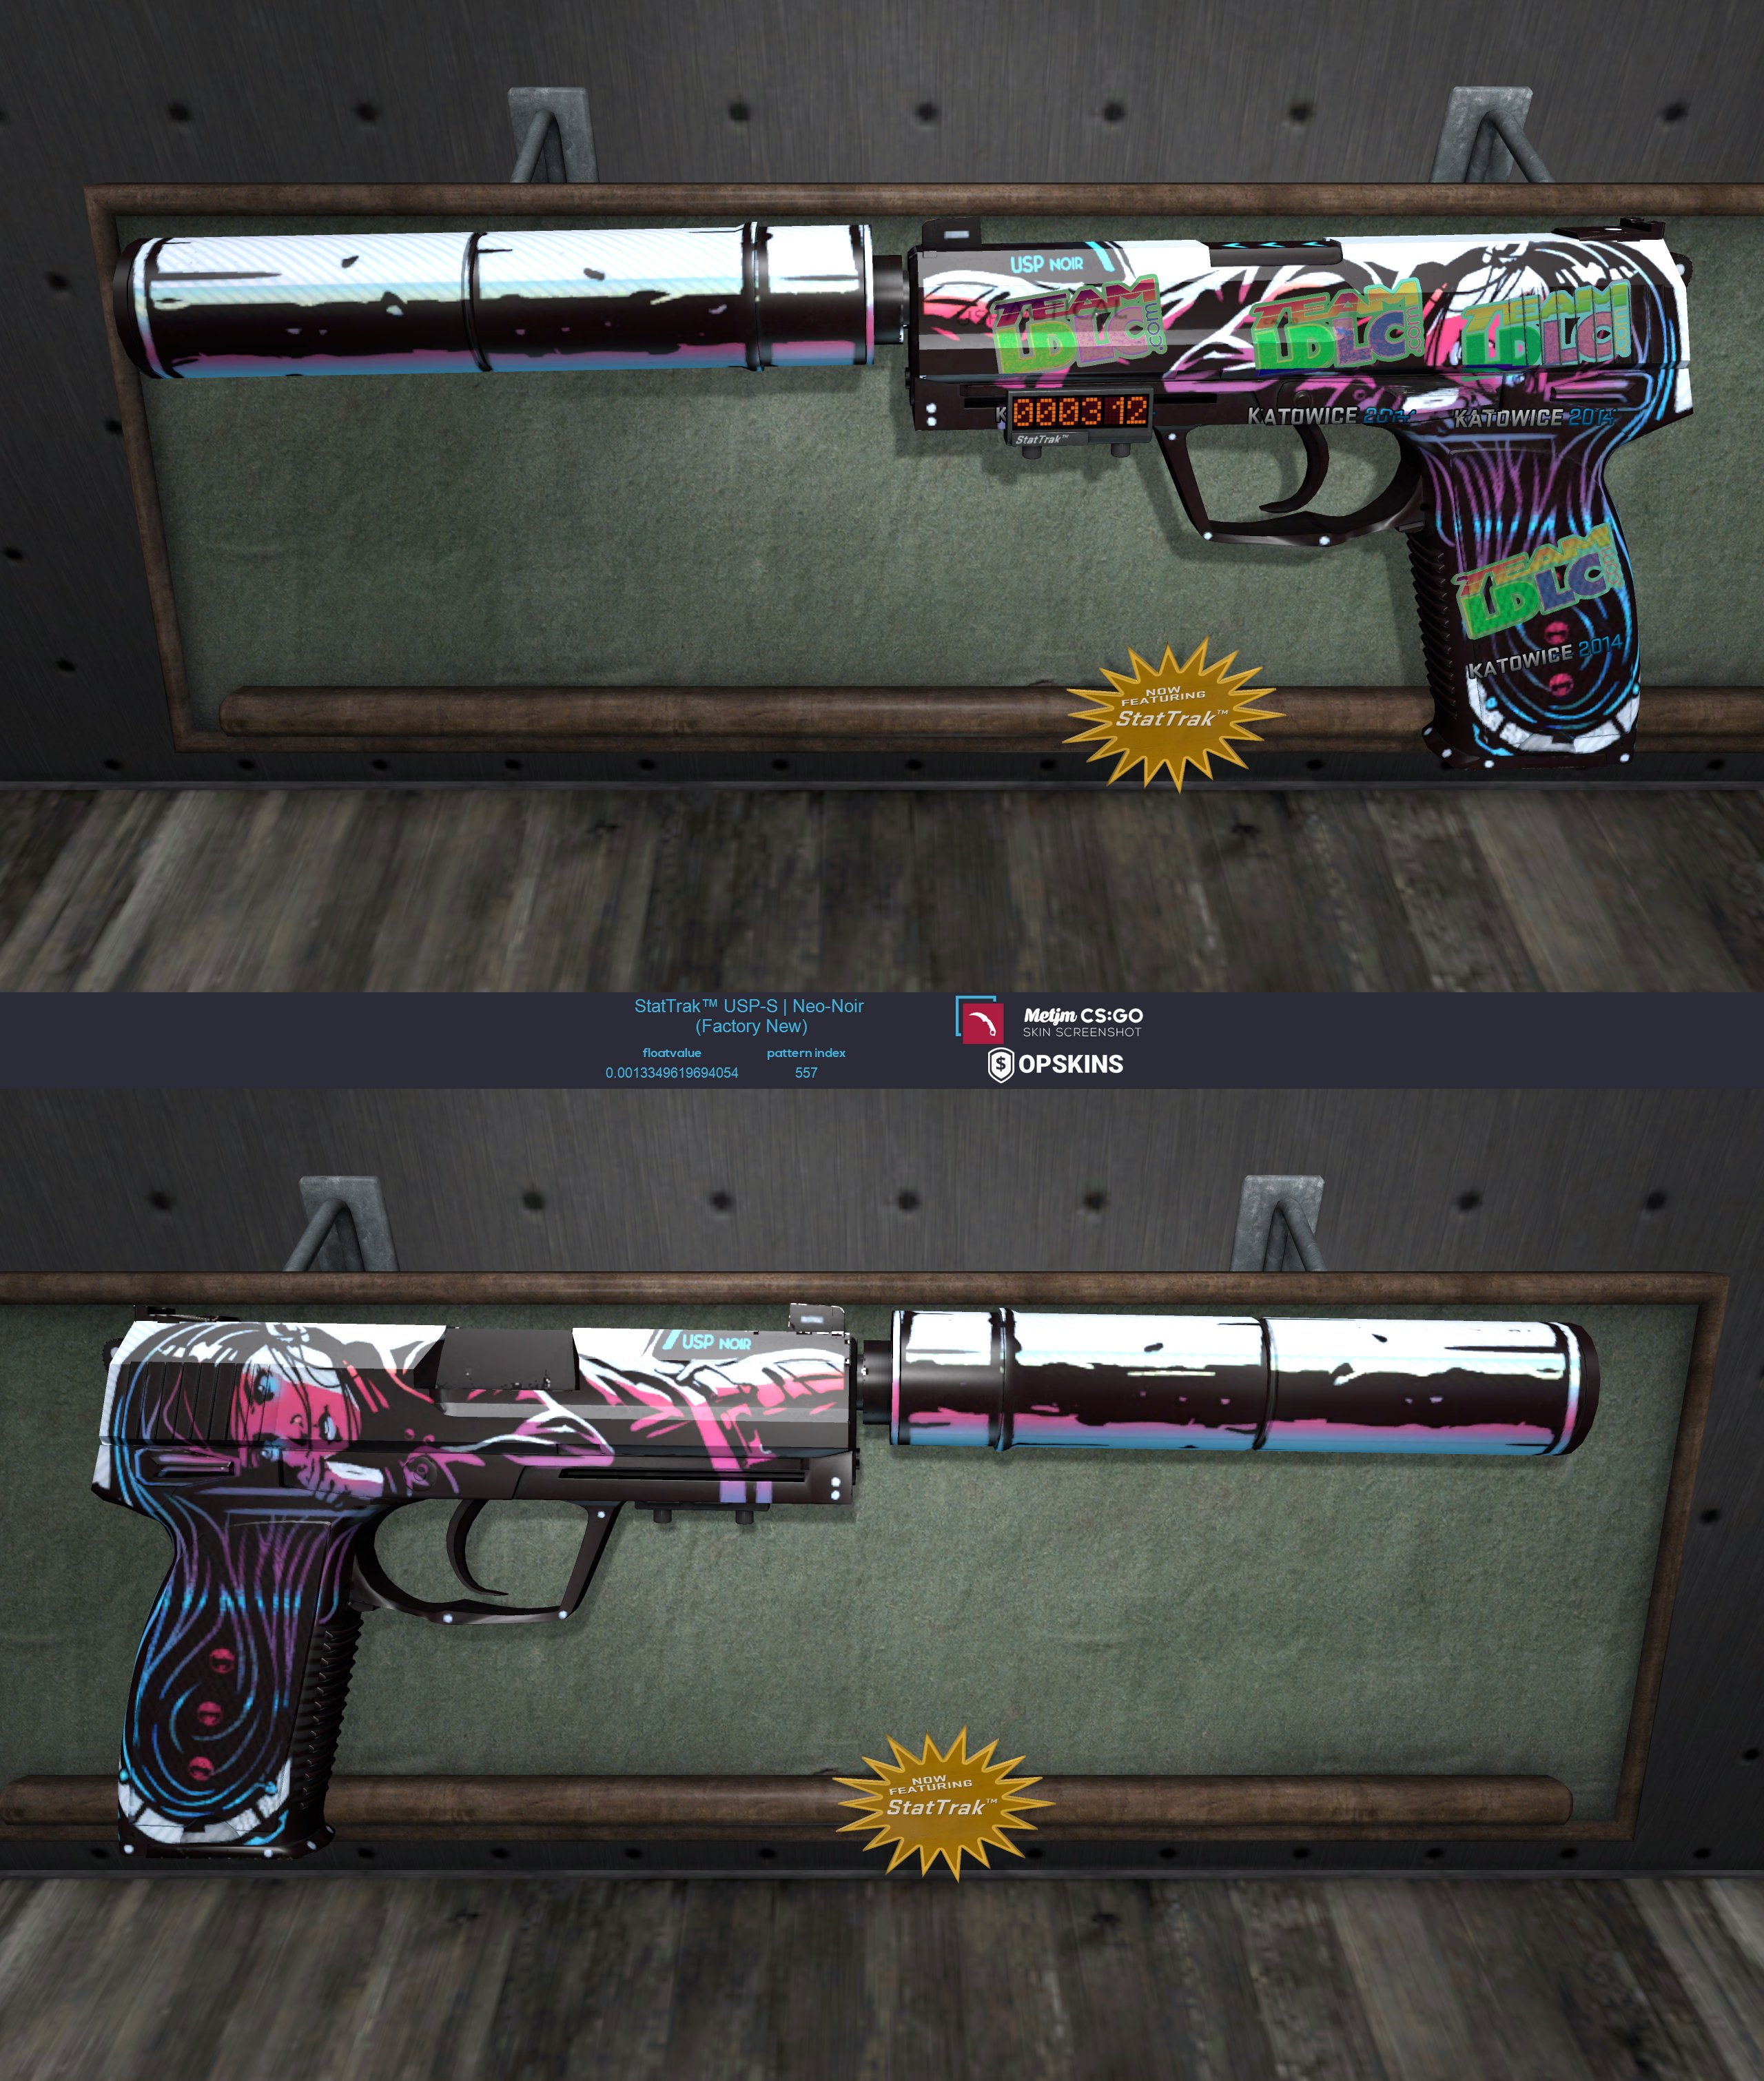 forbrug Forslag kaptajn pETR on Twitter: "This beautiful USP Neo Noir was crafted recently with 4x  LDLC Holo Katowice 2014's, putting the stickers alone at around 2.000$~  Well, today I found out the owner of